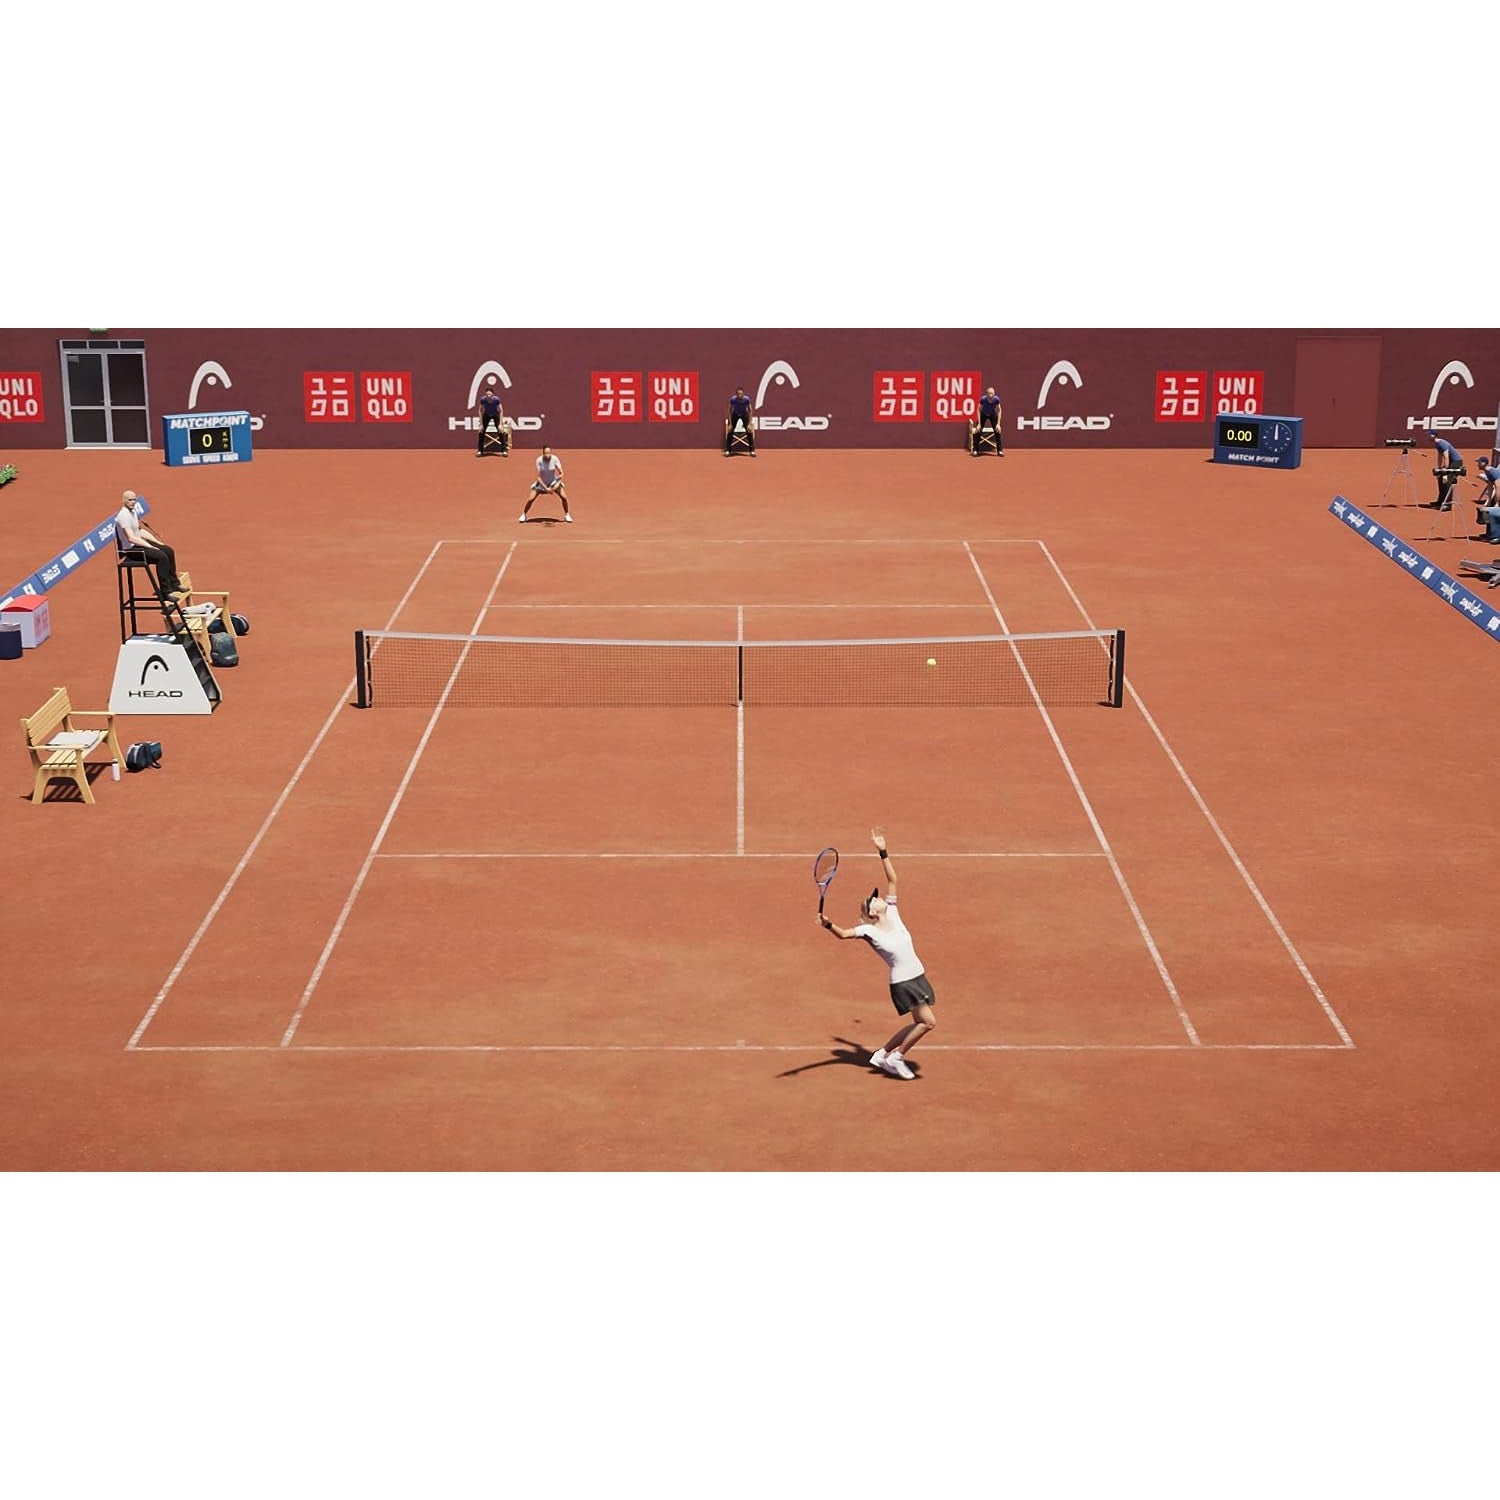 Matchpoint - Tennis Championships: Legends Edition (PS4)